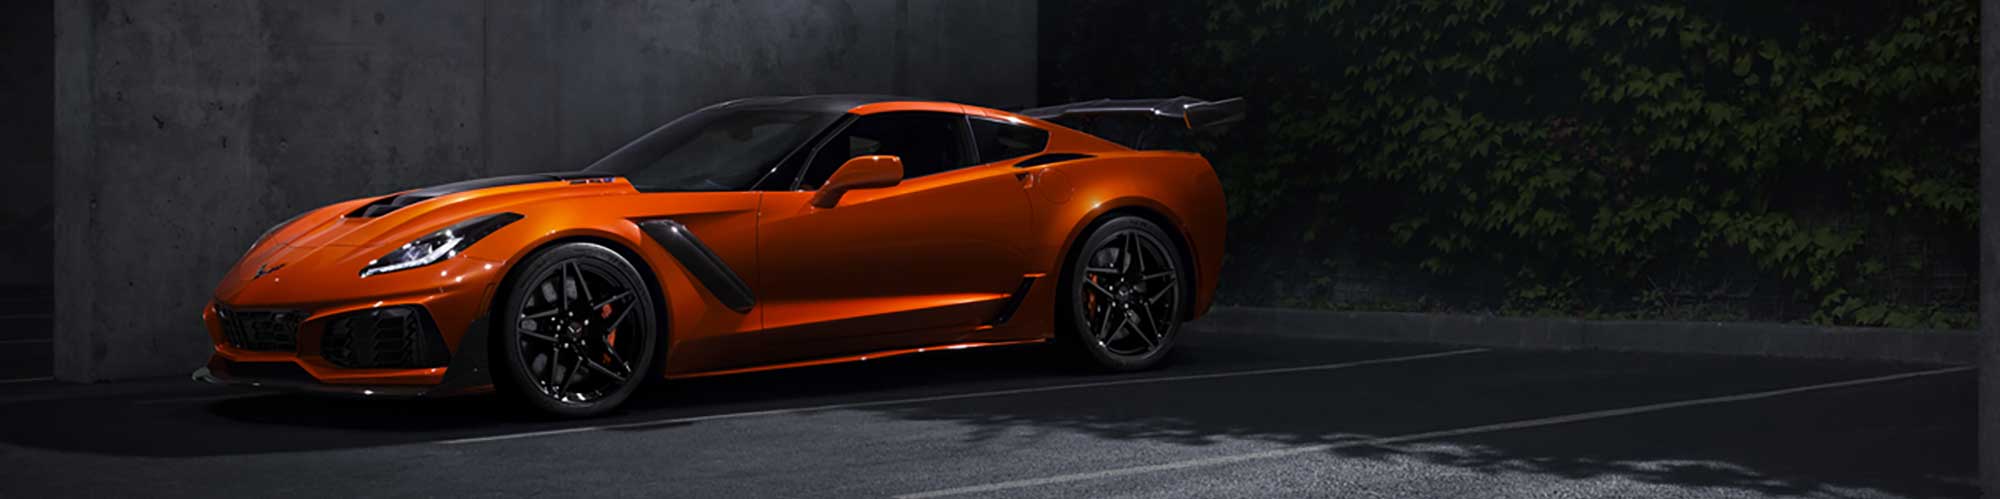 Chevy-Discontinues-755-HP-Corvette-ZR1-Crate-Engine